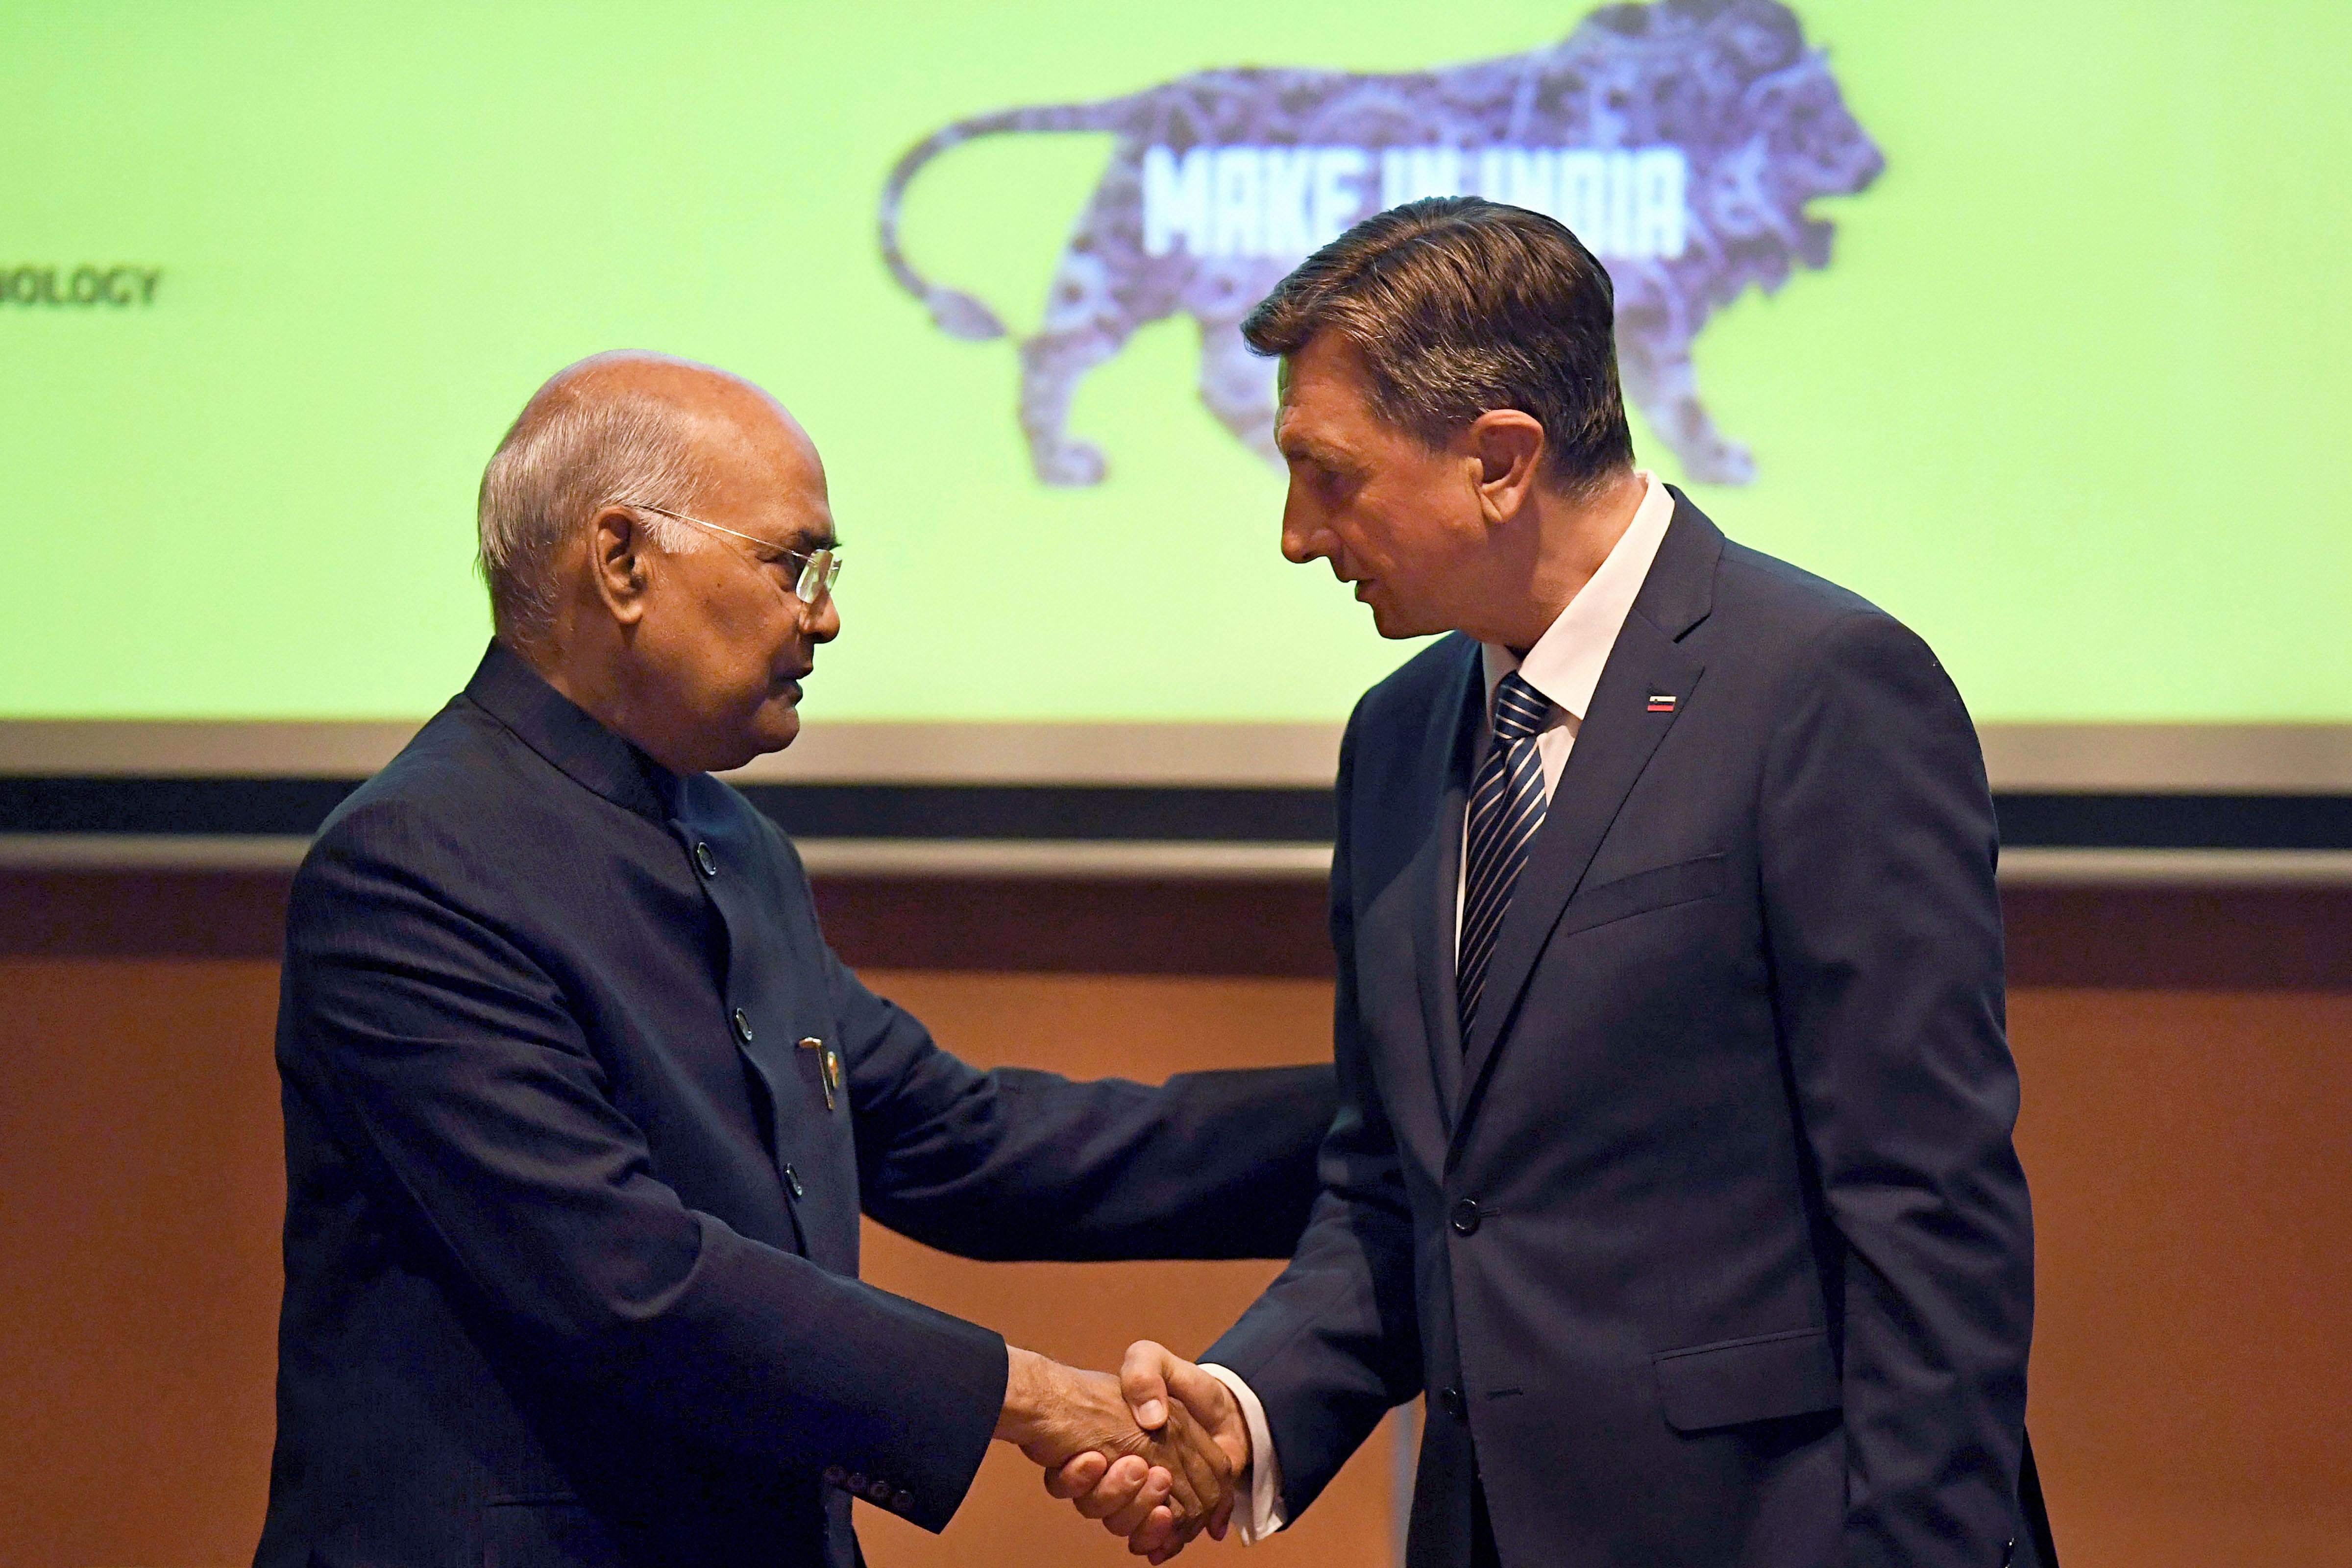 President Ram Nath Kovind and his Slovenian counterpart Borut Pahor shake hands during the signing of agreements at Presidential Palace - PTI